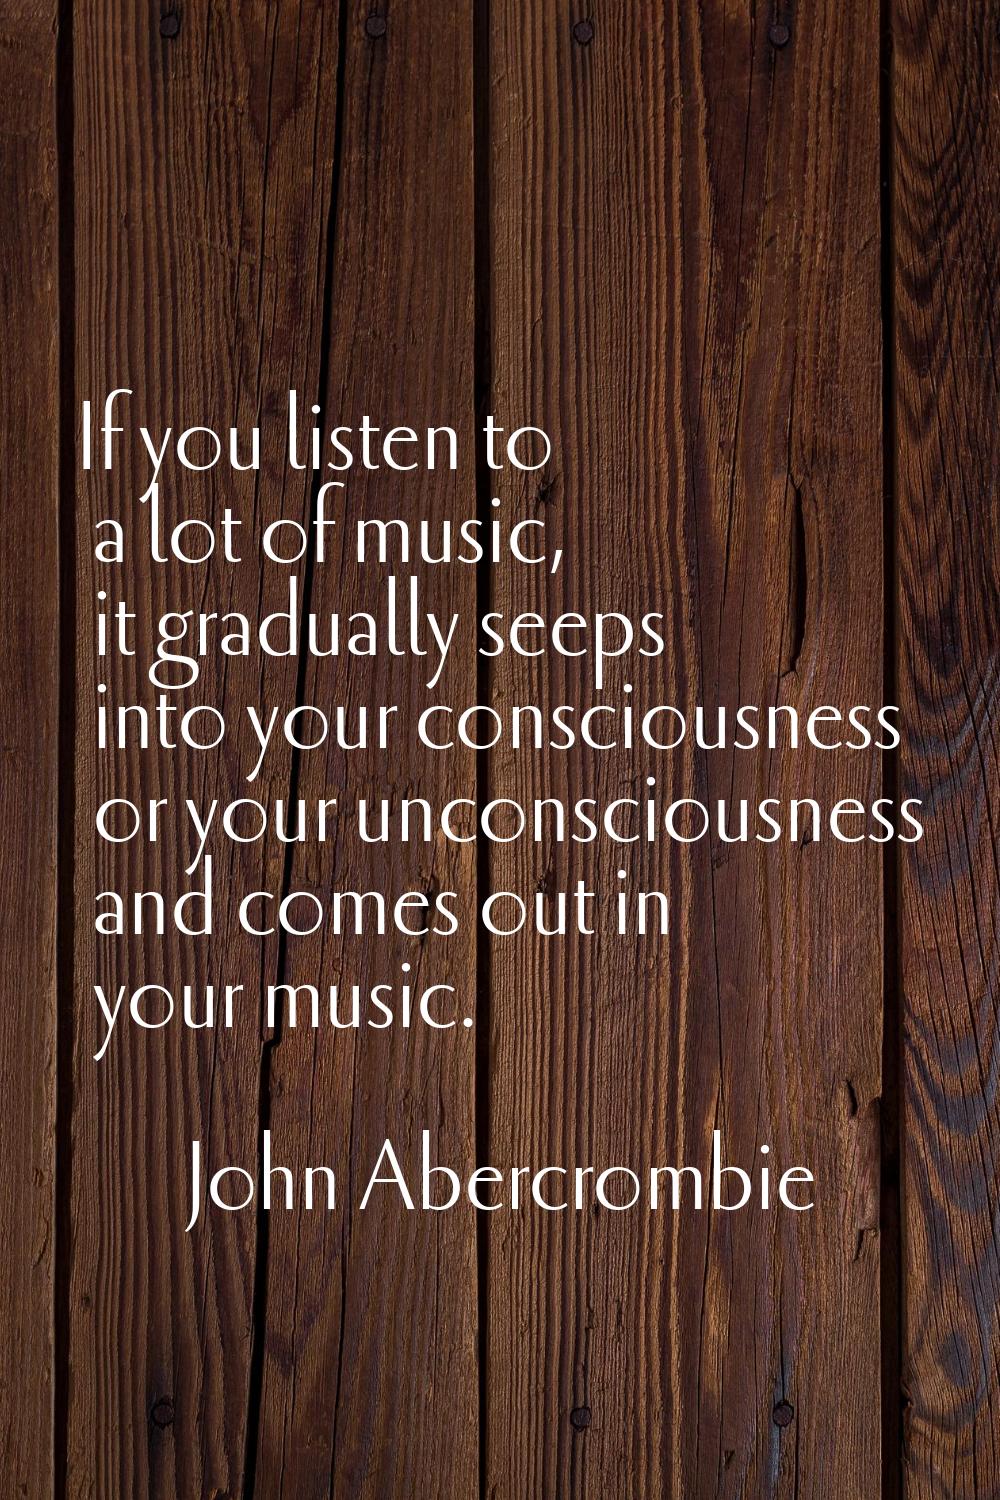 If you listen to a lot of music, it gradually seeps into your consciousness or your unconsciousness